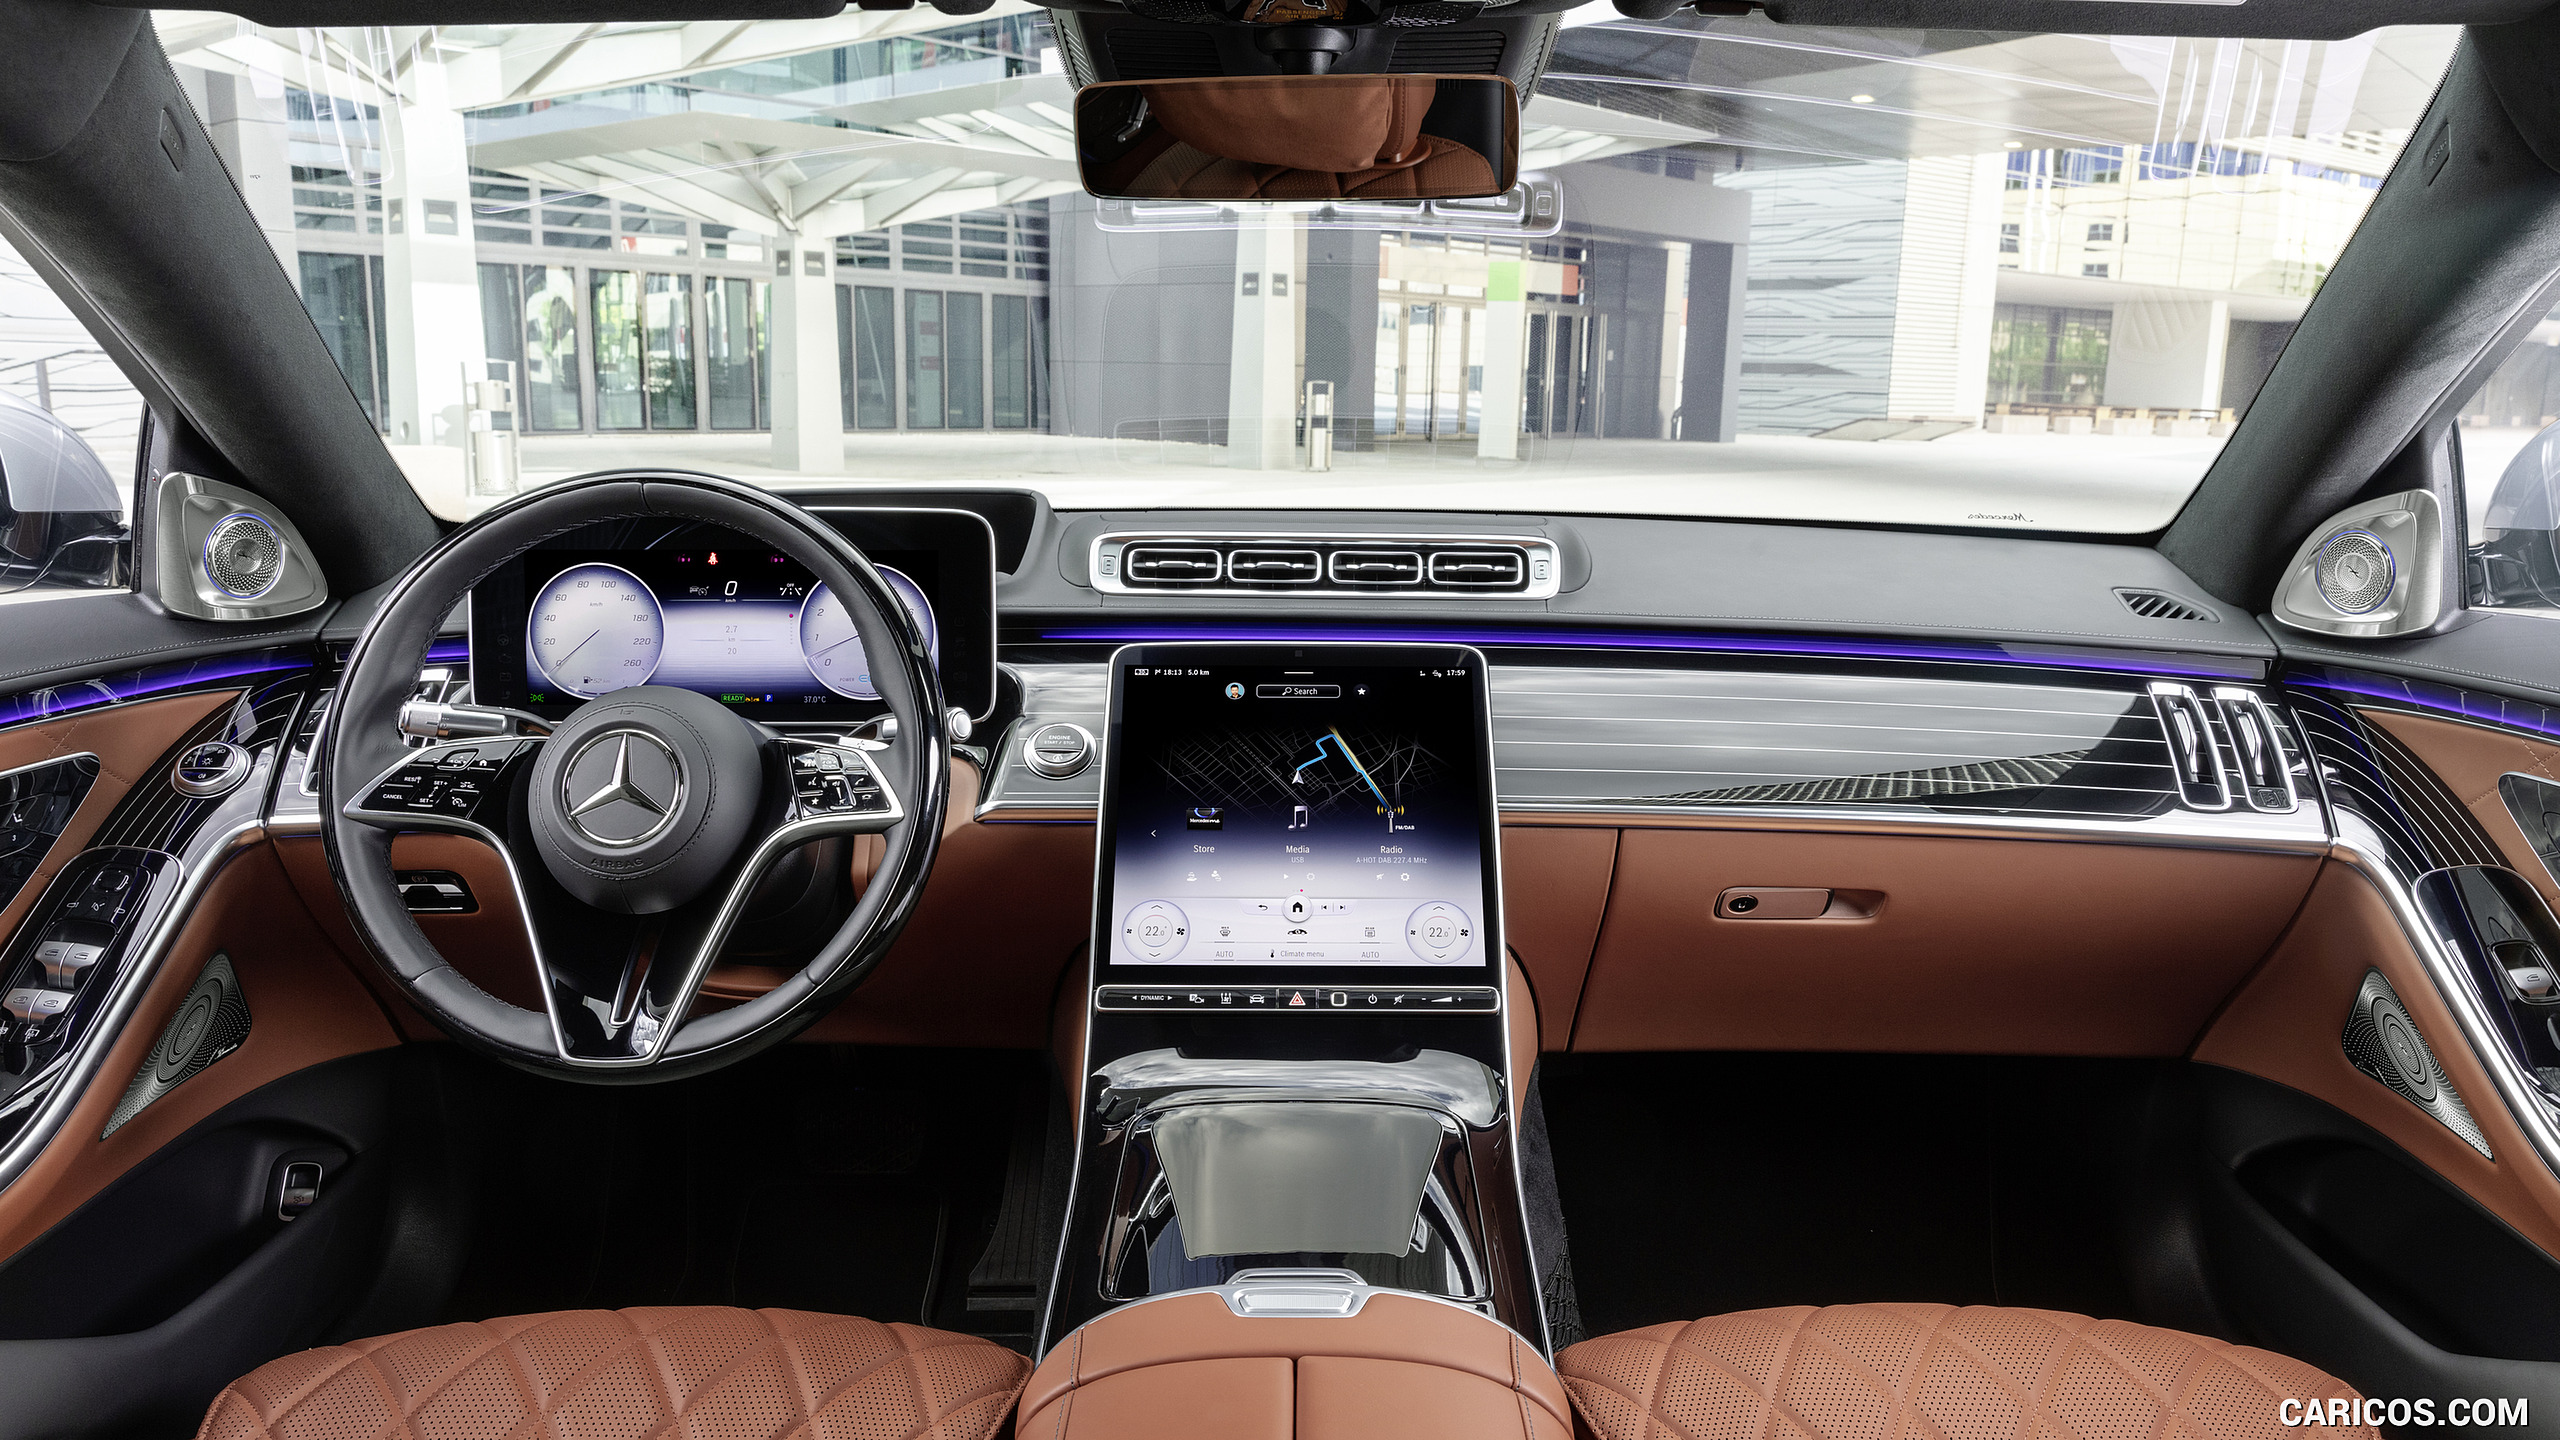 2021 Mercedes-Benz S-Class (Color: Leather Siena Brown) - Interior, Cockpit, #110 of 316